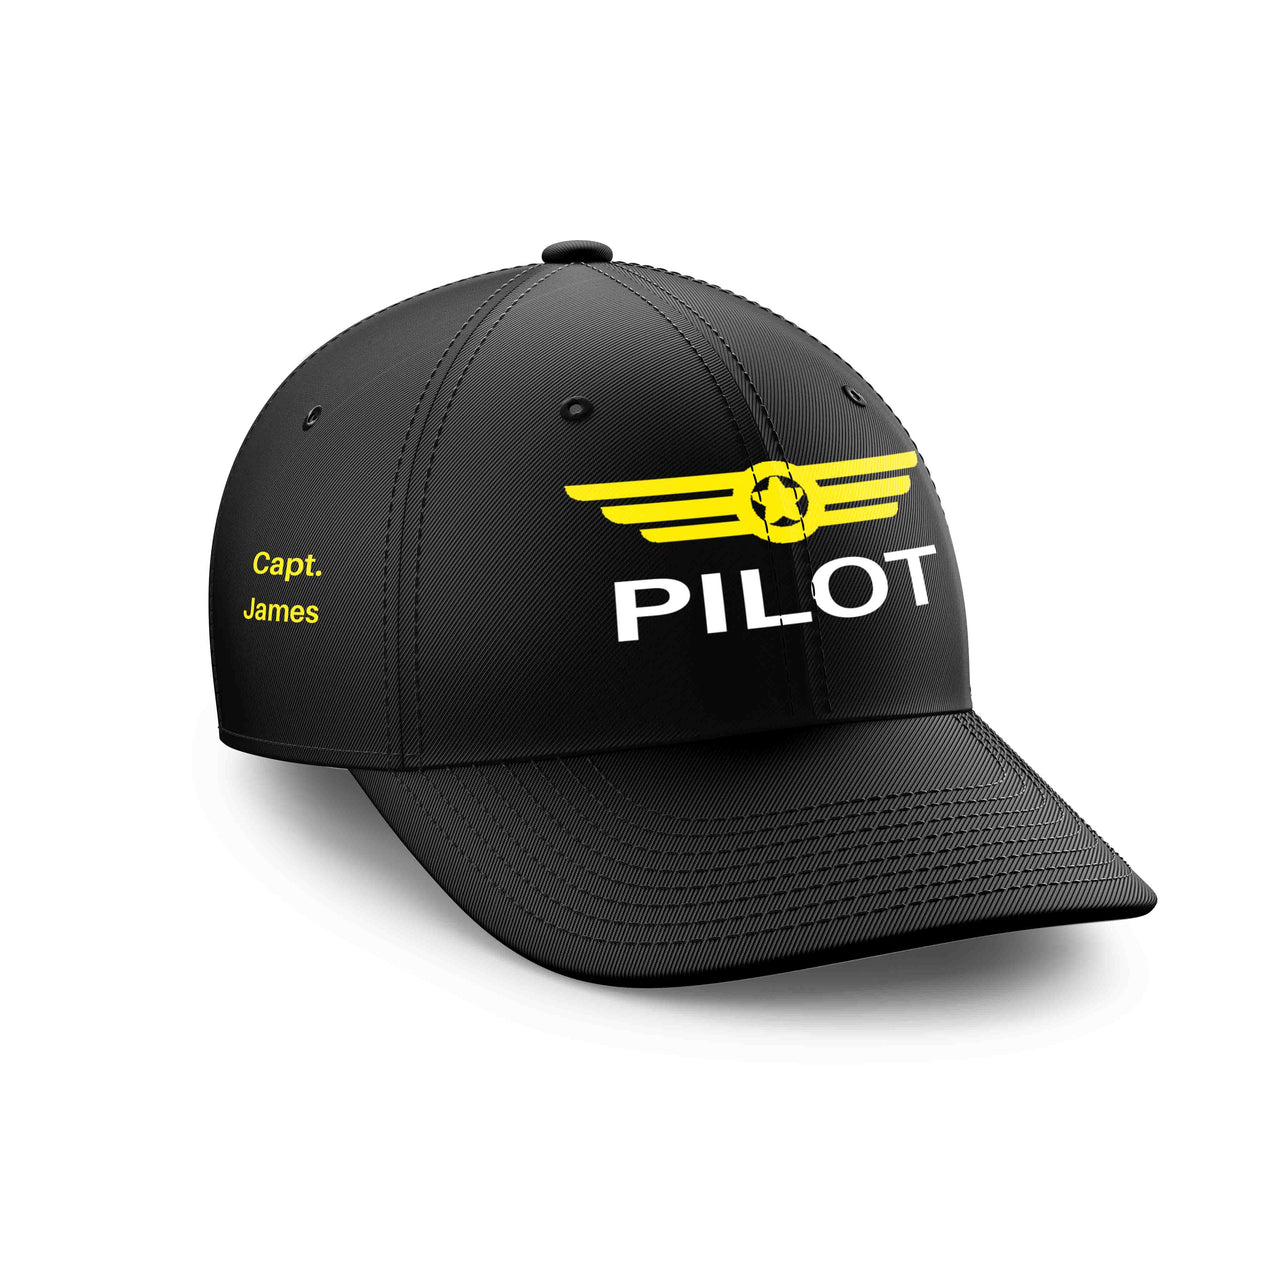 Customizable Name & Pilot Badge Embroidered Hats